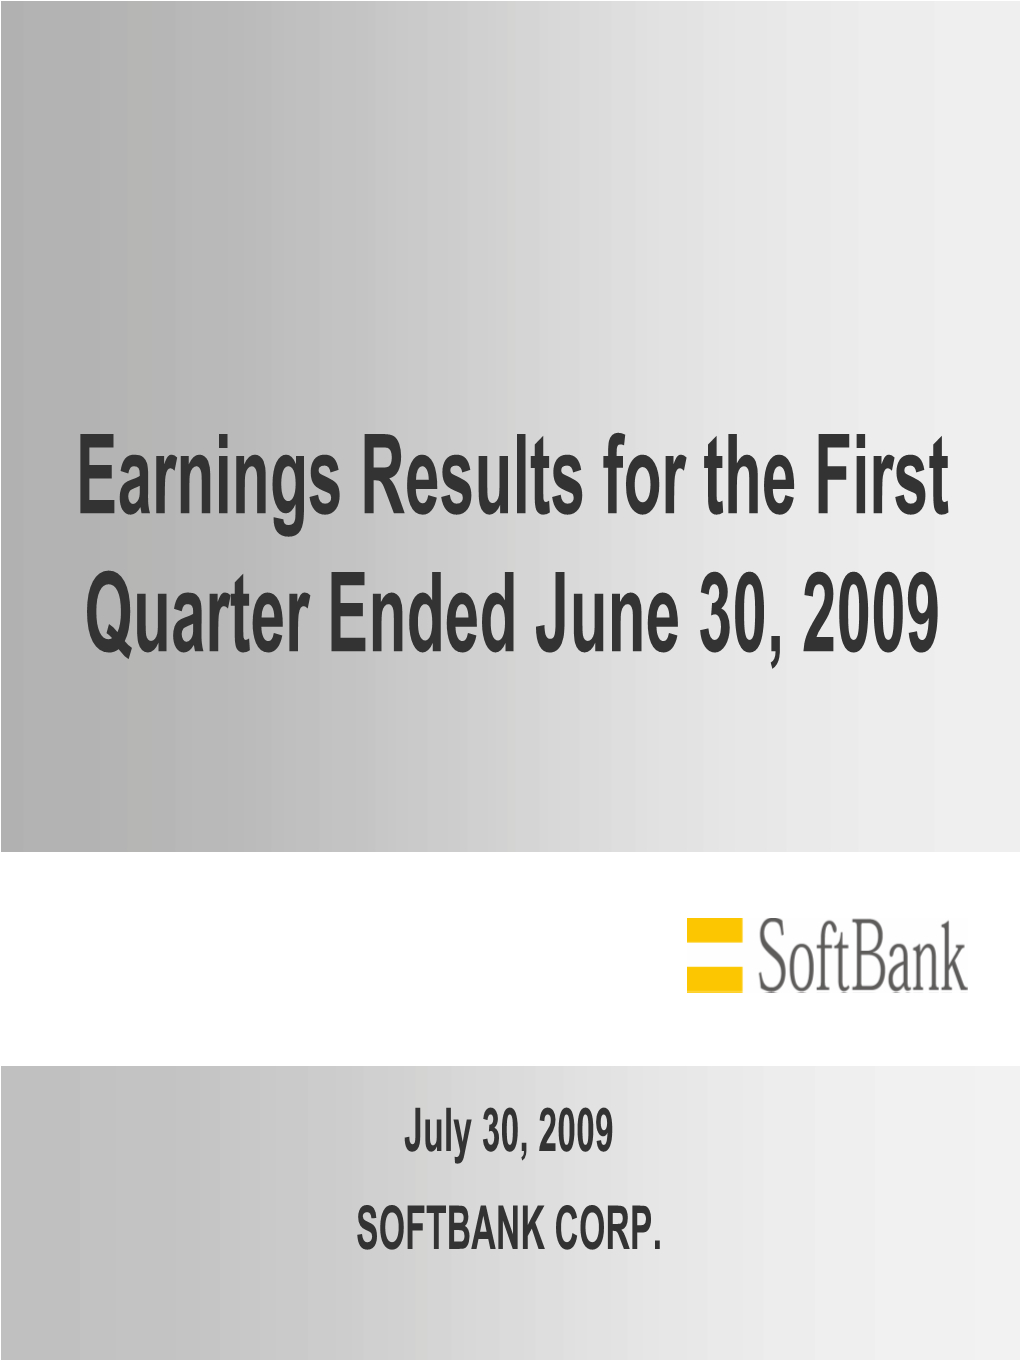 Earnings Results for the First Quarter Ended June 30, 2009